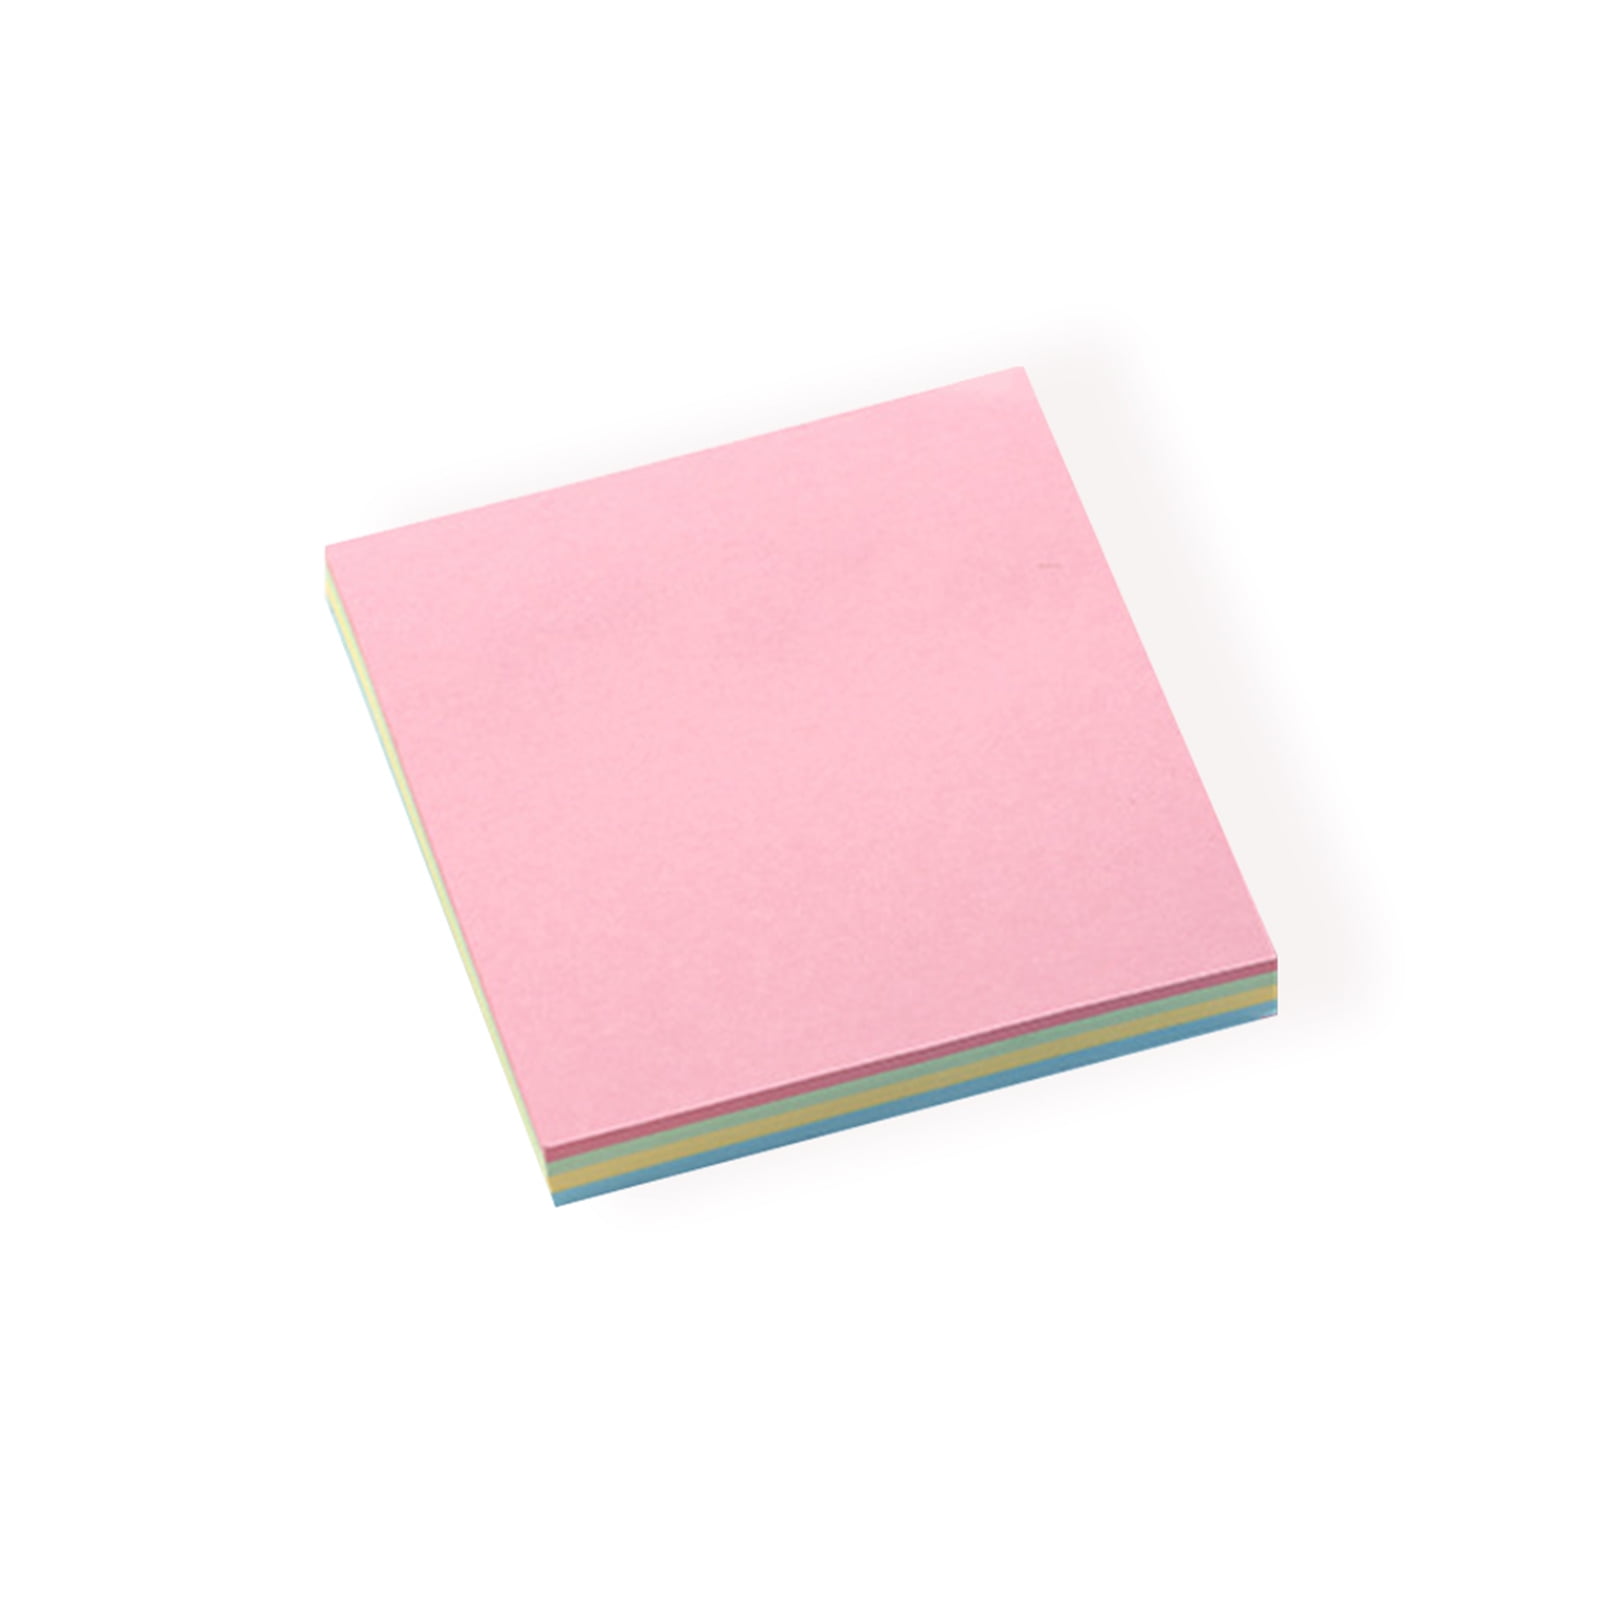 STICKY NOTES Self Adhesive Paper Note Memo Pad Squares St Reminder Birthday F9N1